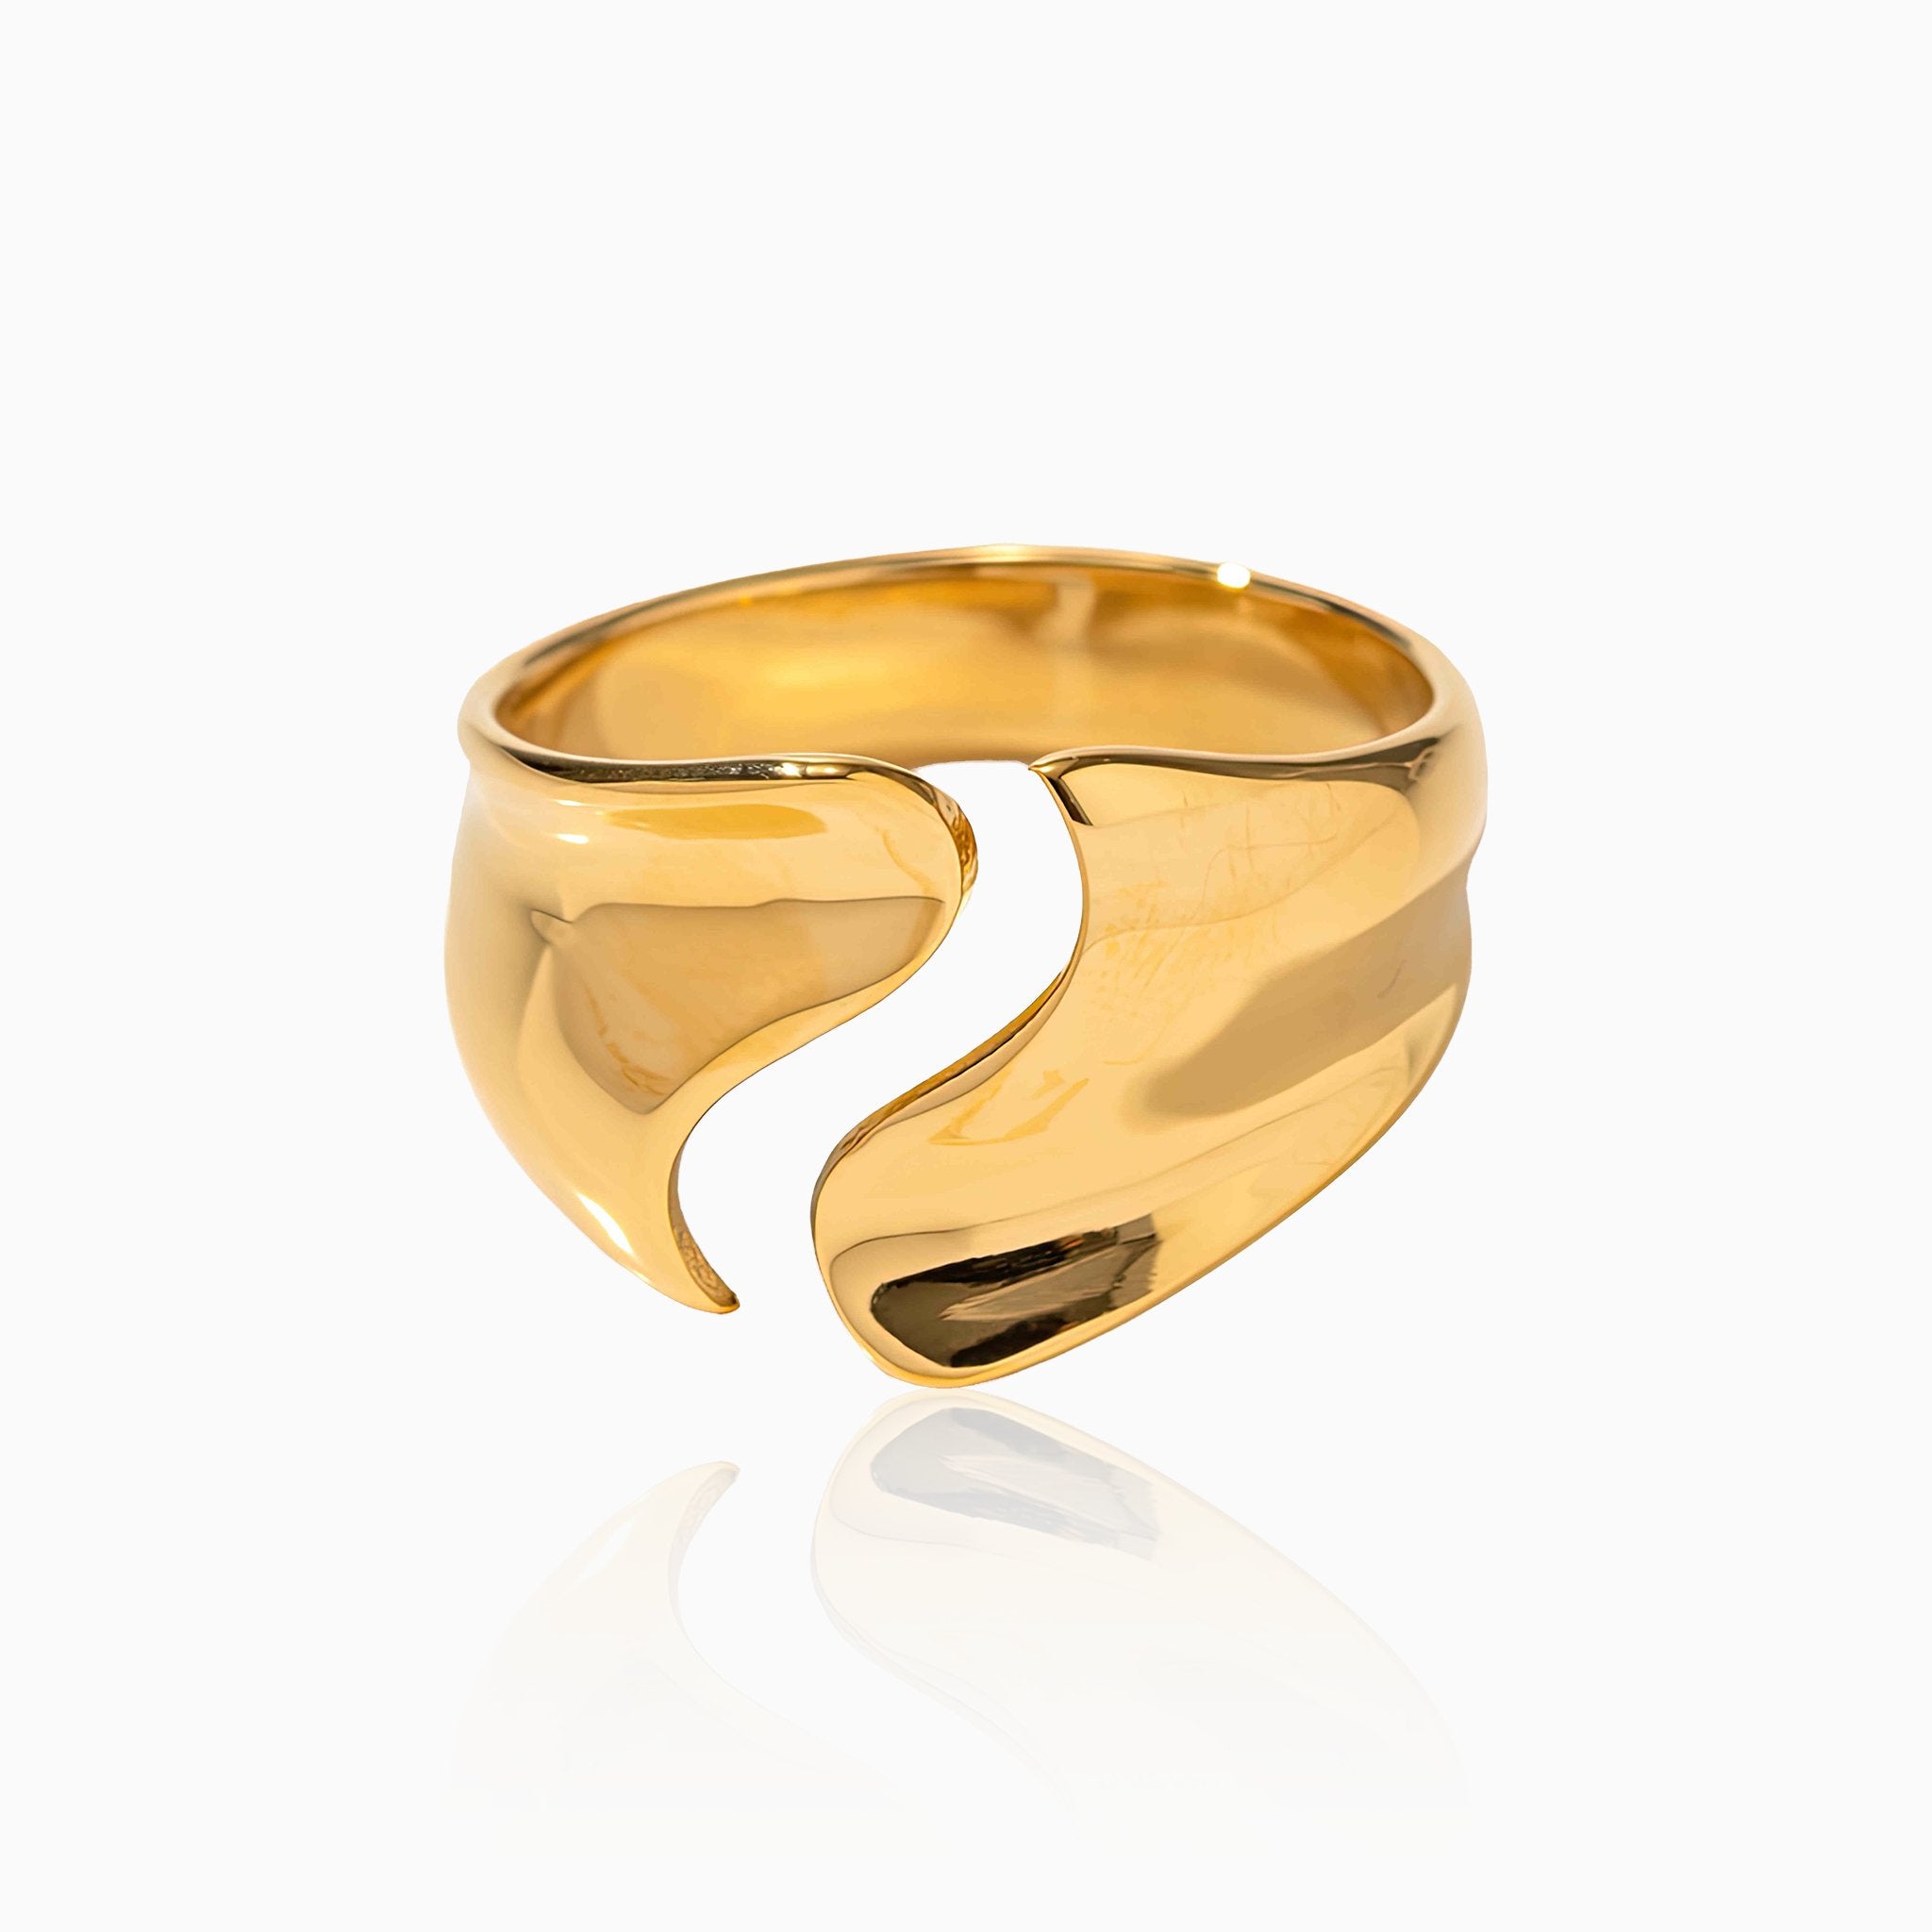 Curved Opening Design Ring - Nobbier - Ring - 18K Gold And Titanium PVD Coated Jewelry